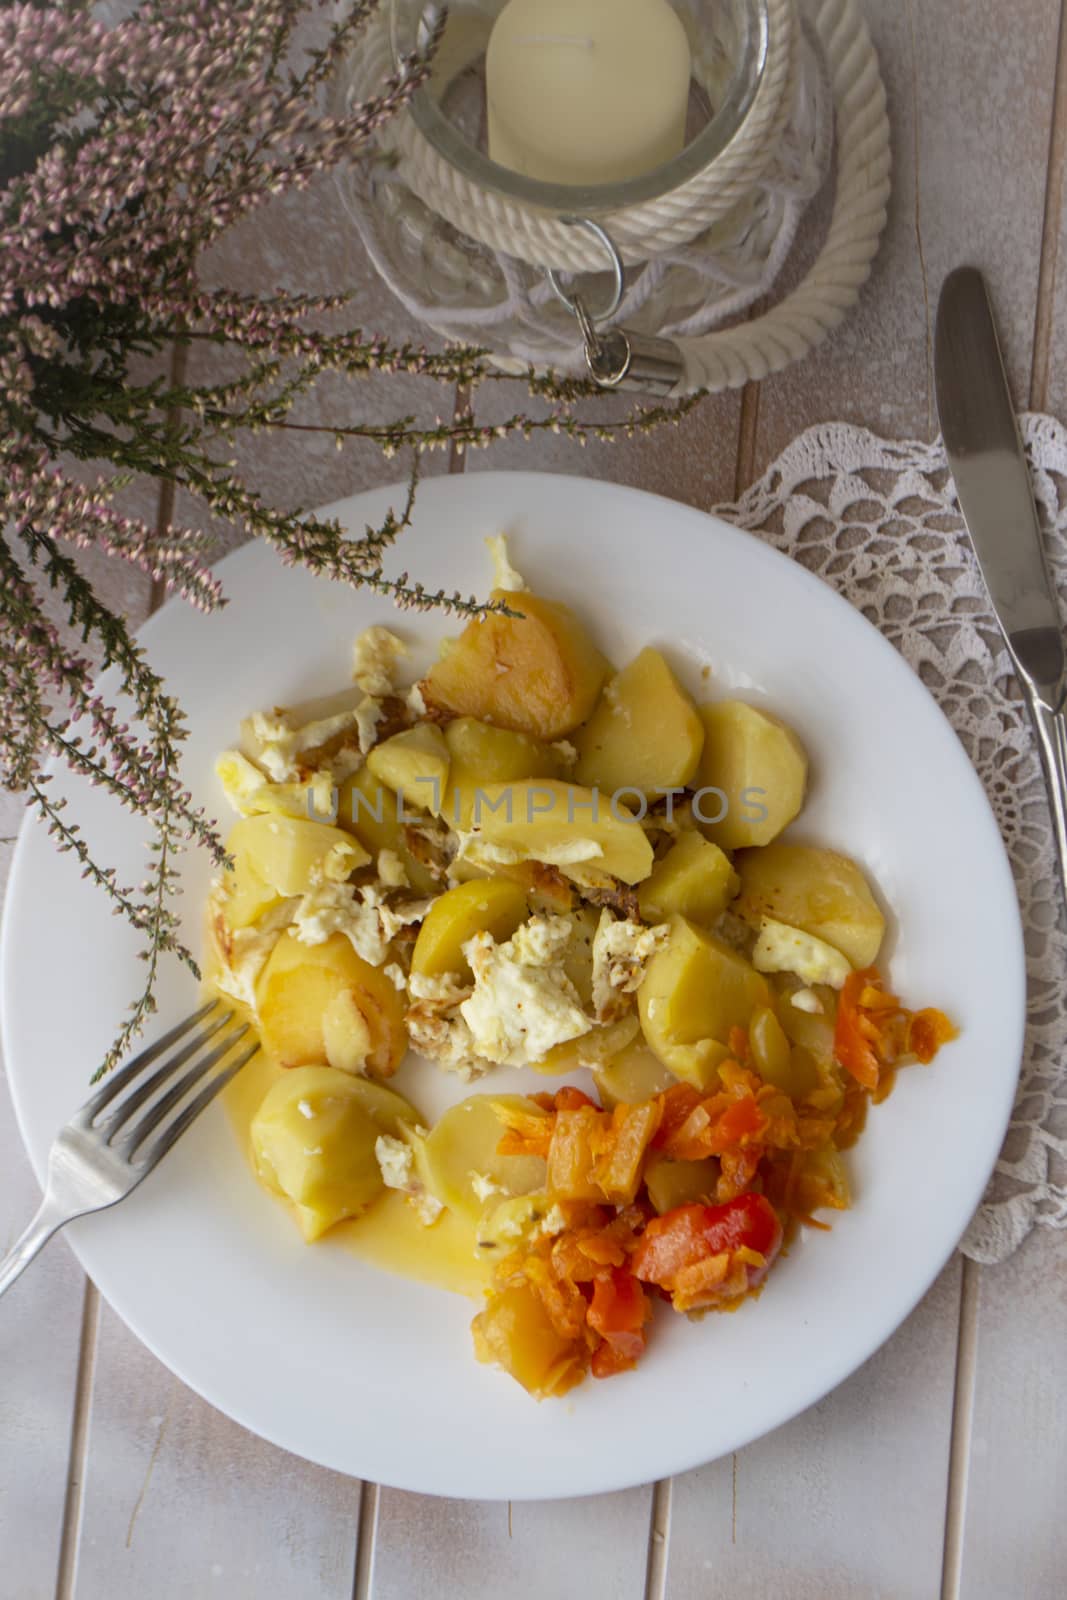 Boiled potatoes with vegetables on white plate. Flat view